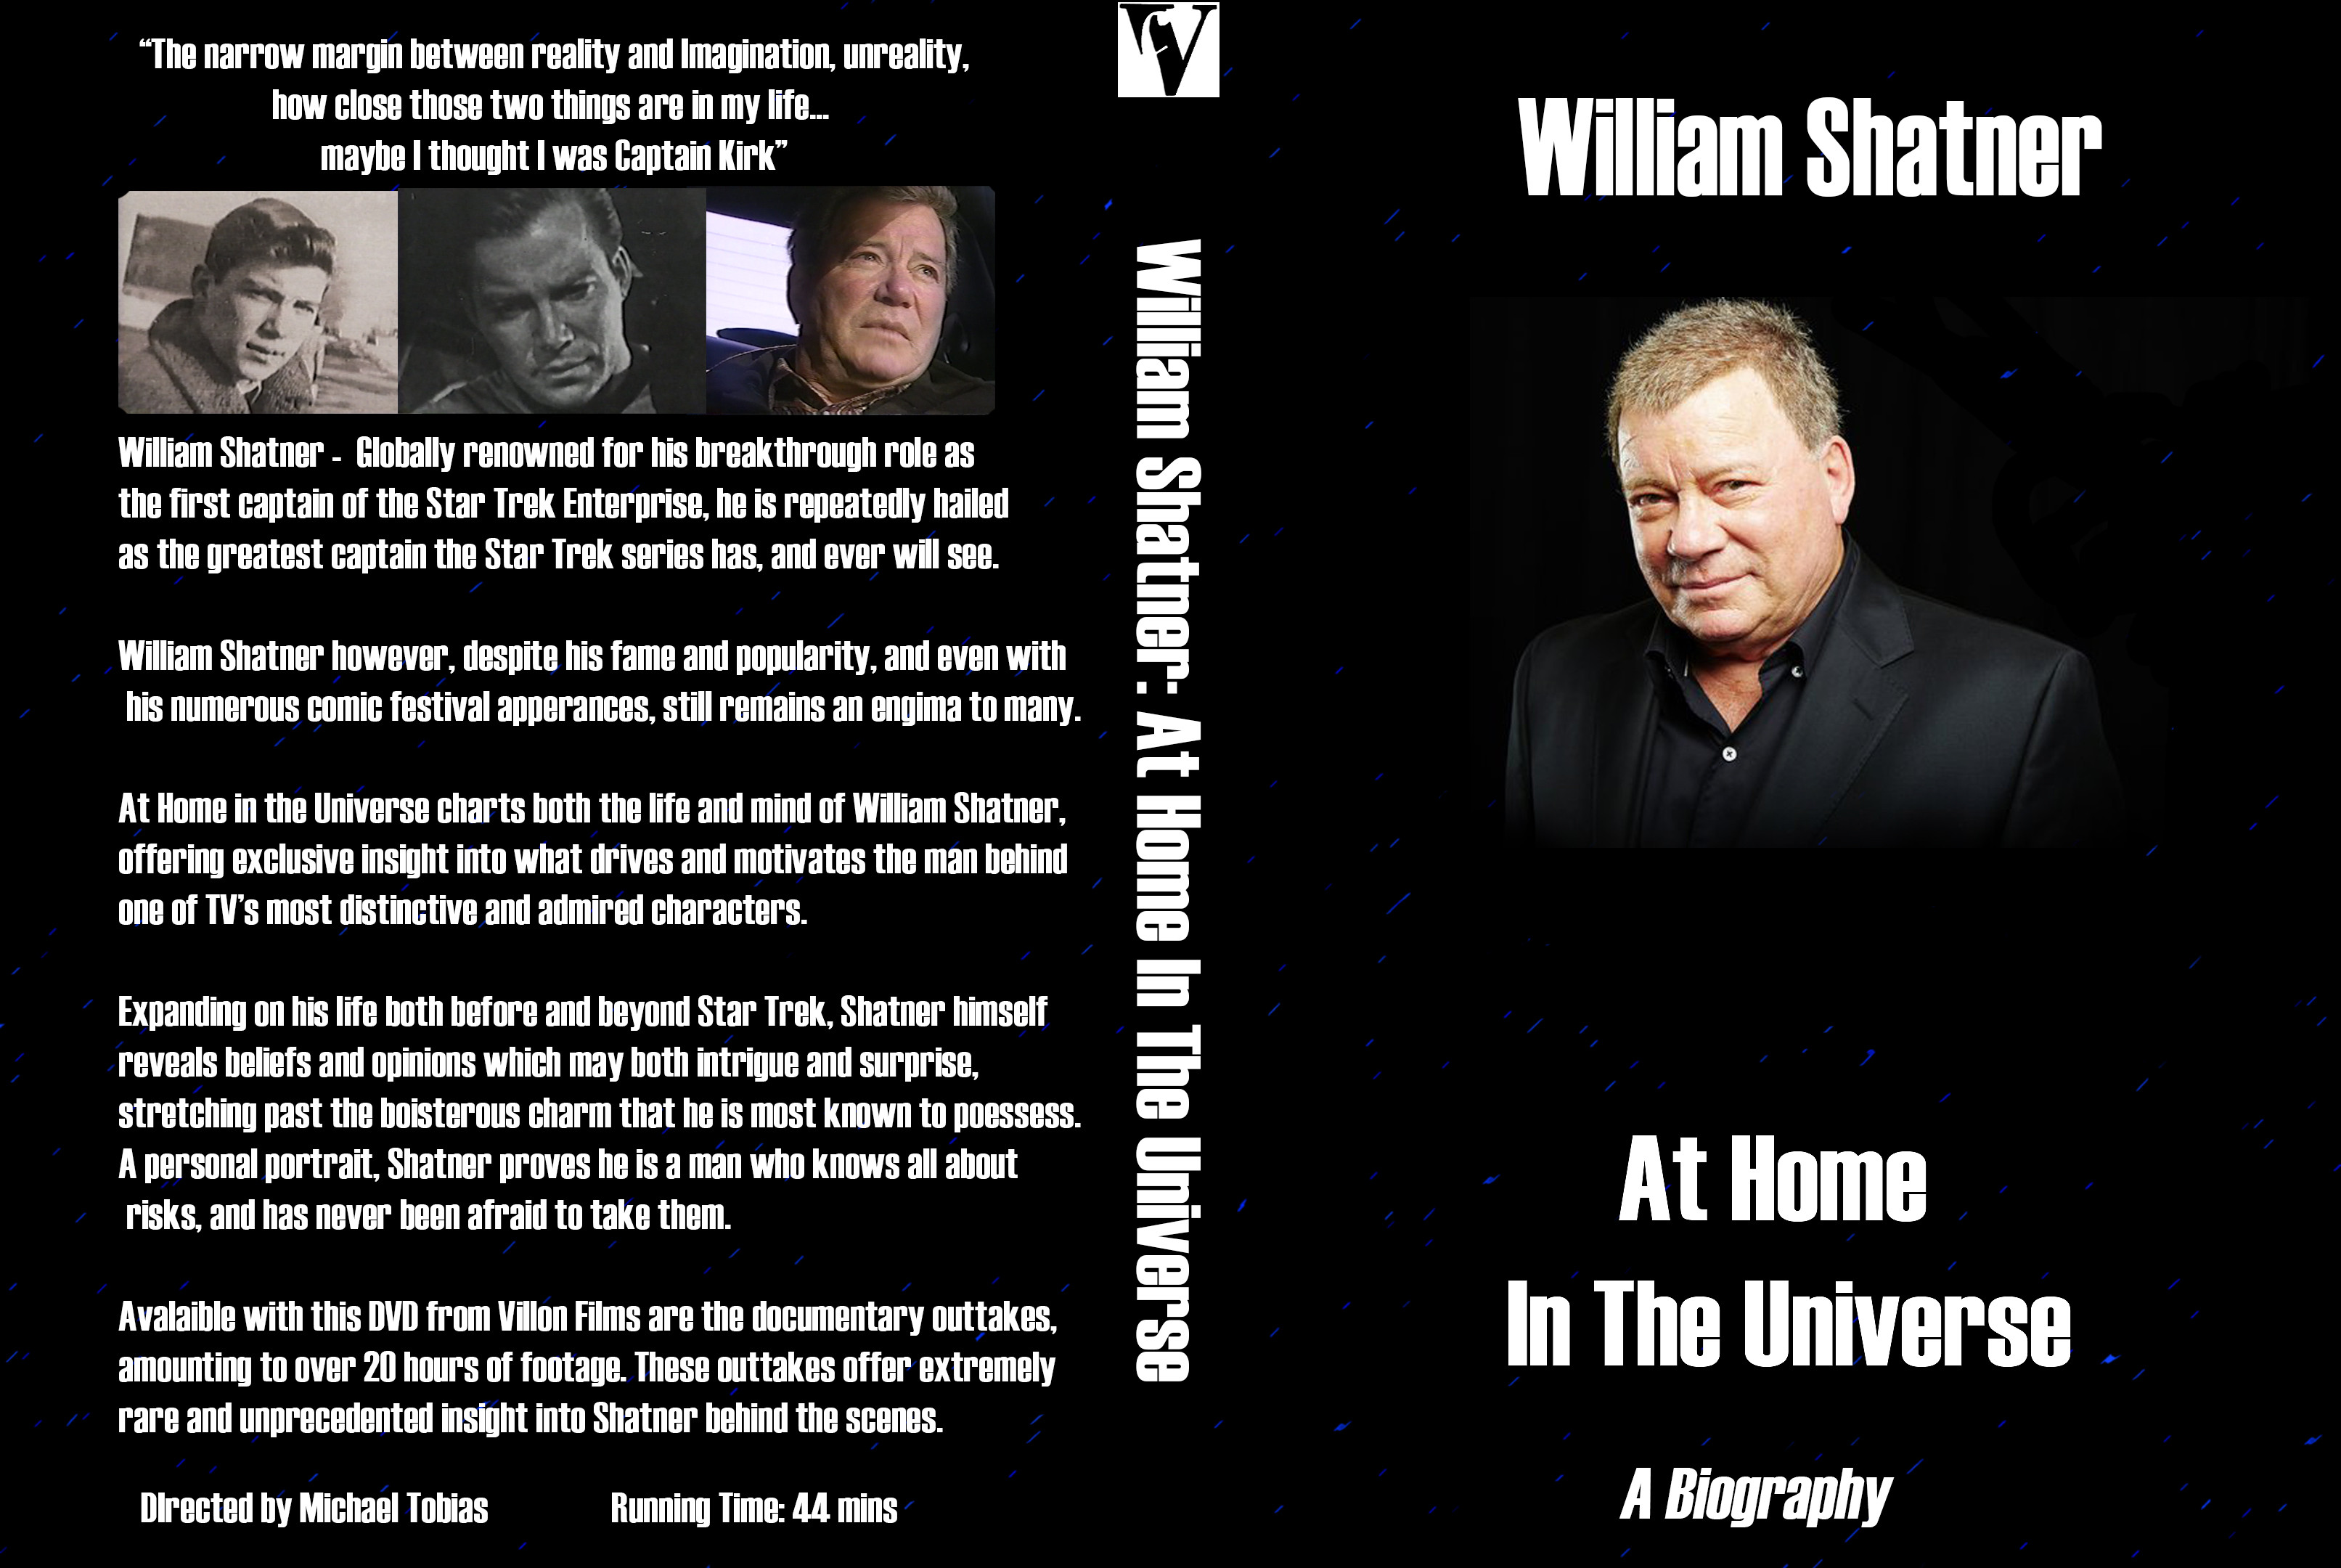 William Shatner: At Home In The Universe - DVD Sleeve.